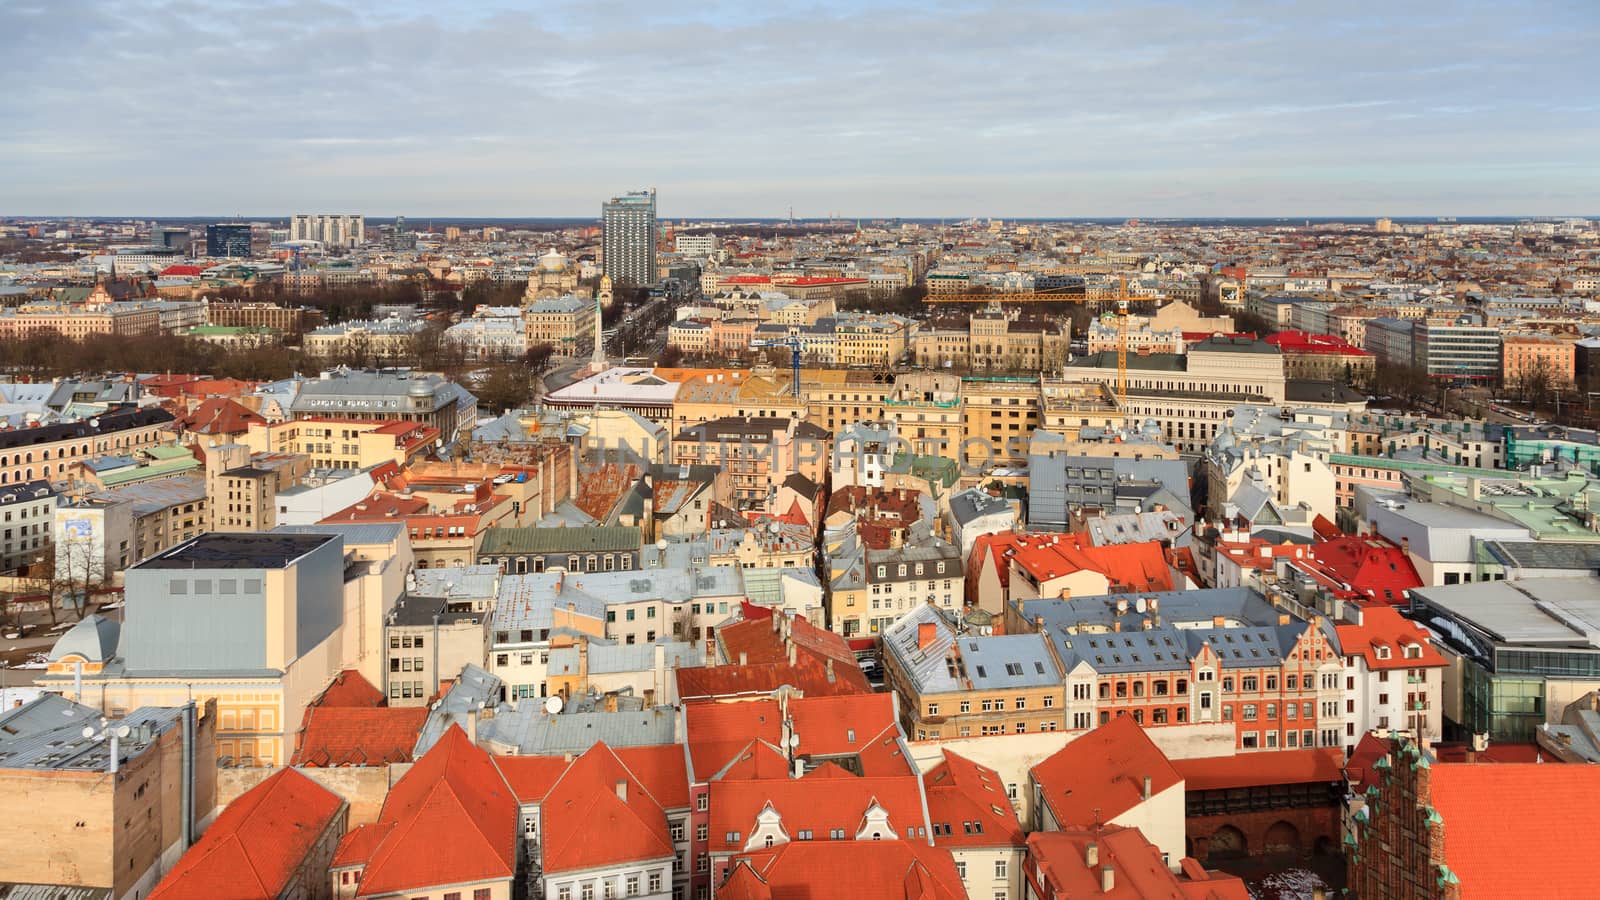 A panorama of the city of Riga capital of Latvia.  The Freedom Monument, National Opera and Nativity of Christ Cathedral can all be seen.